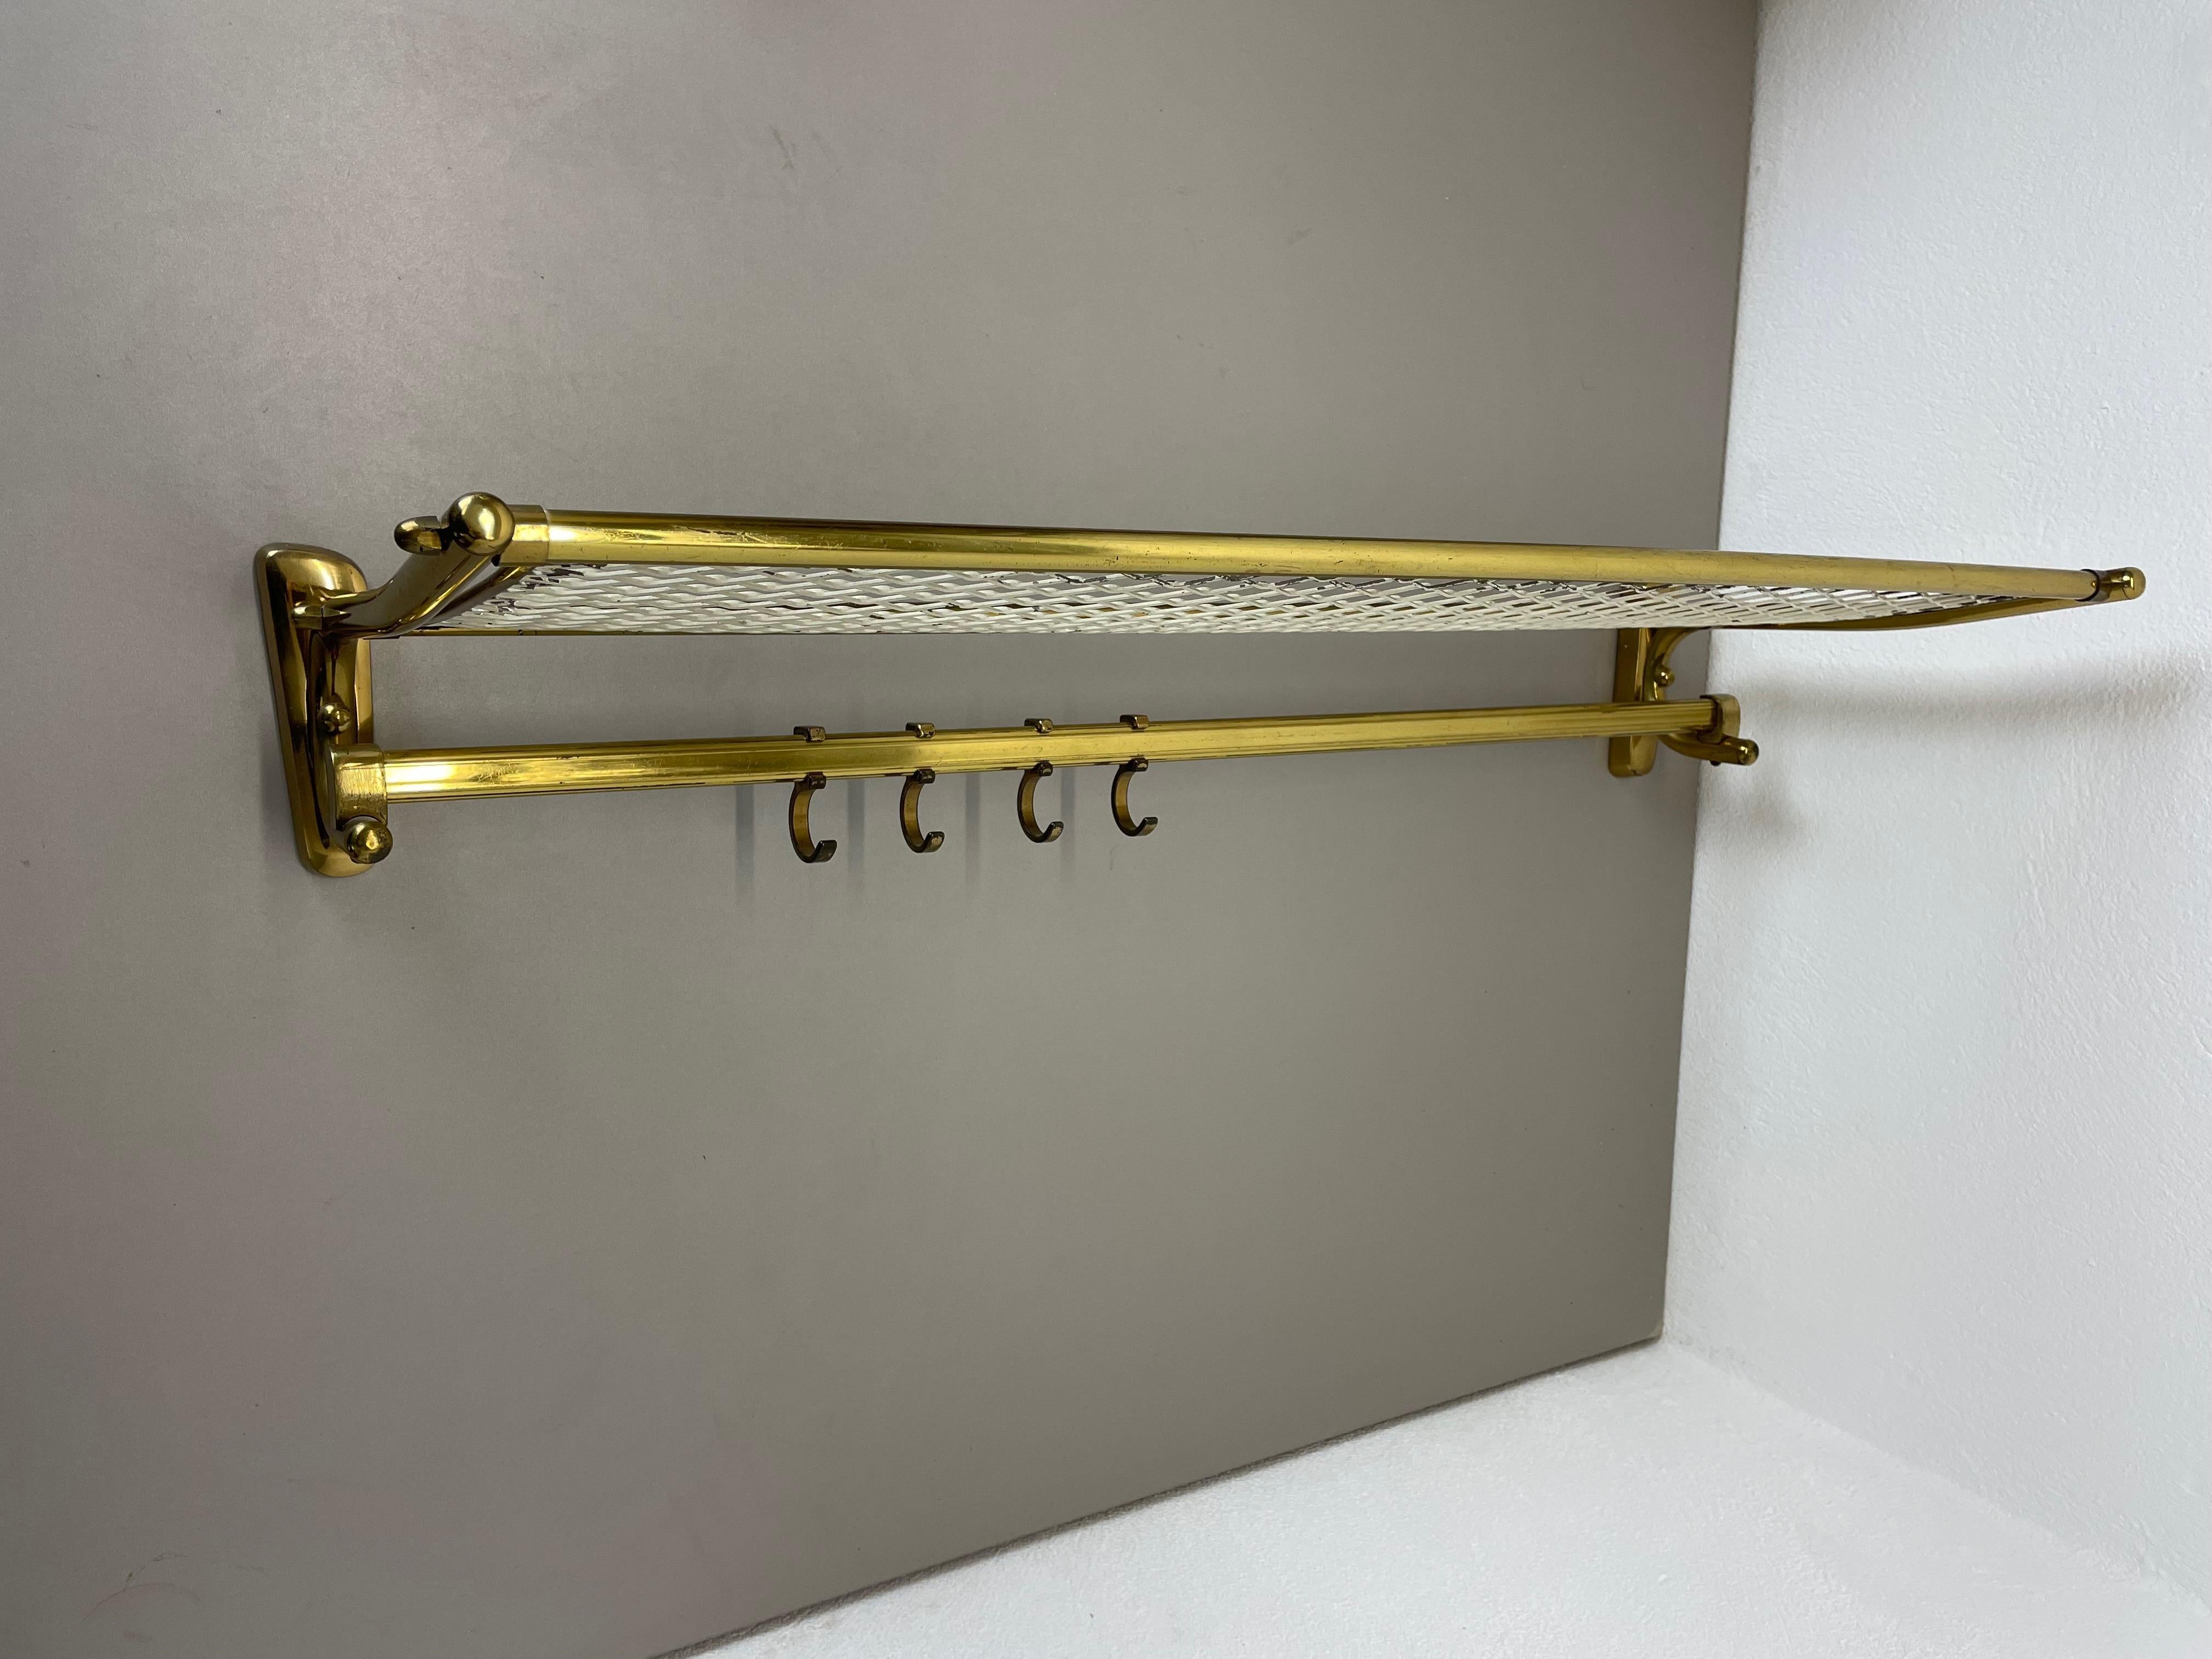 Article:

Bauhaus Mategot Style wardrobe element.


Origin:

France


Age:

1950s


Description:

This original vintage Bauhaus Style wardrobe hook element was produced in the 1950s in France. It is made of brass and meta; and at